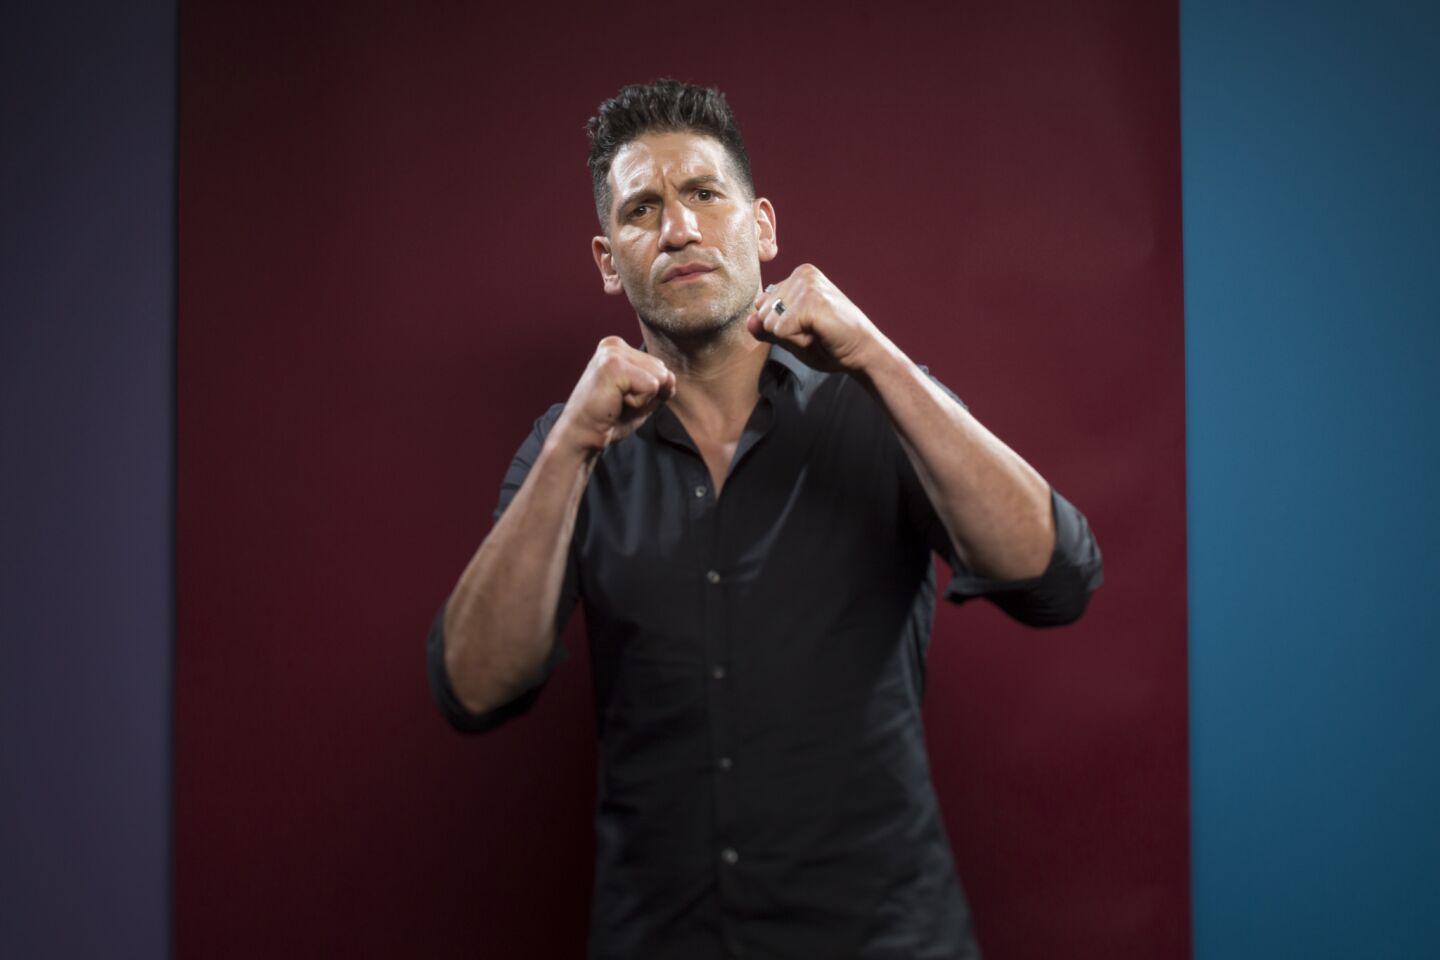 Jon Bernthal, from the television series "Marvel's The Punisher," photographed in the L.A. Times photo studio at Comic-Con 2017.